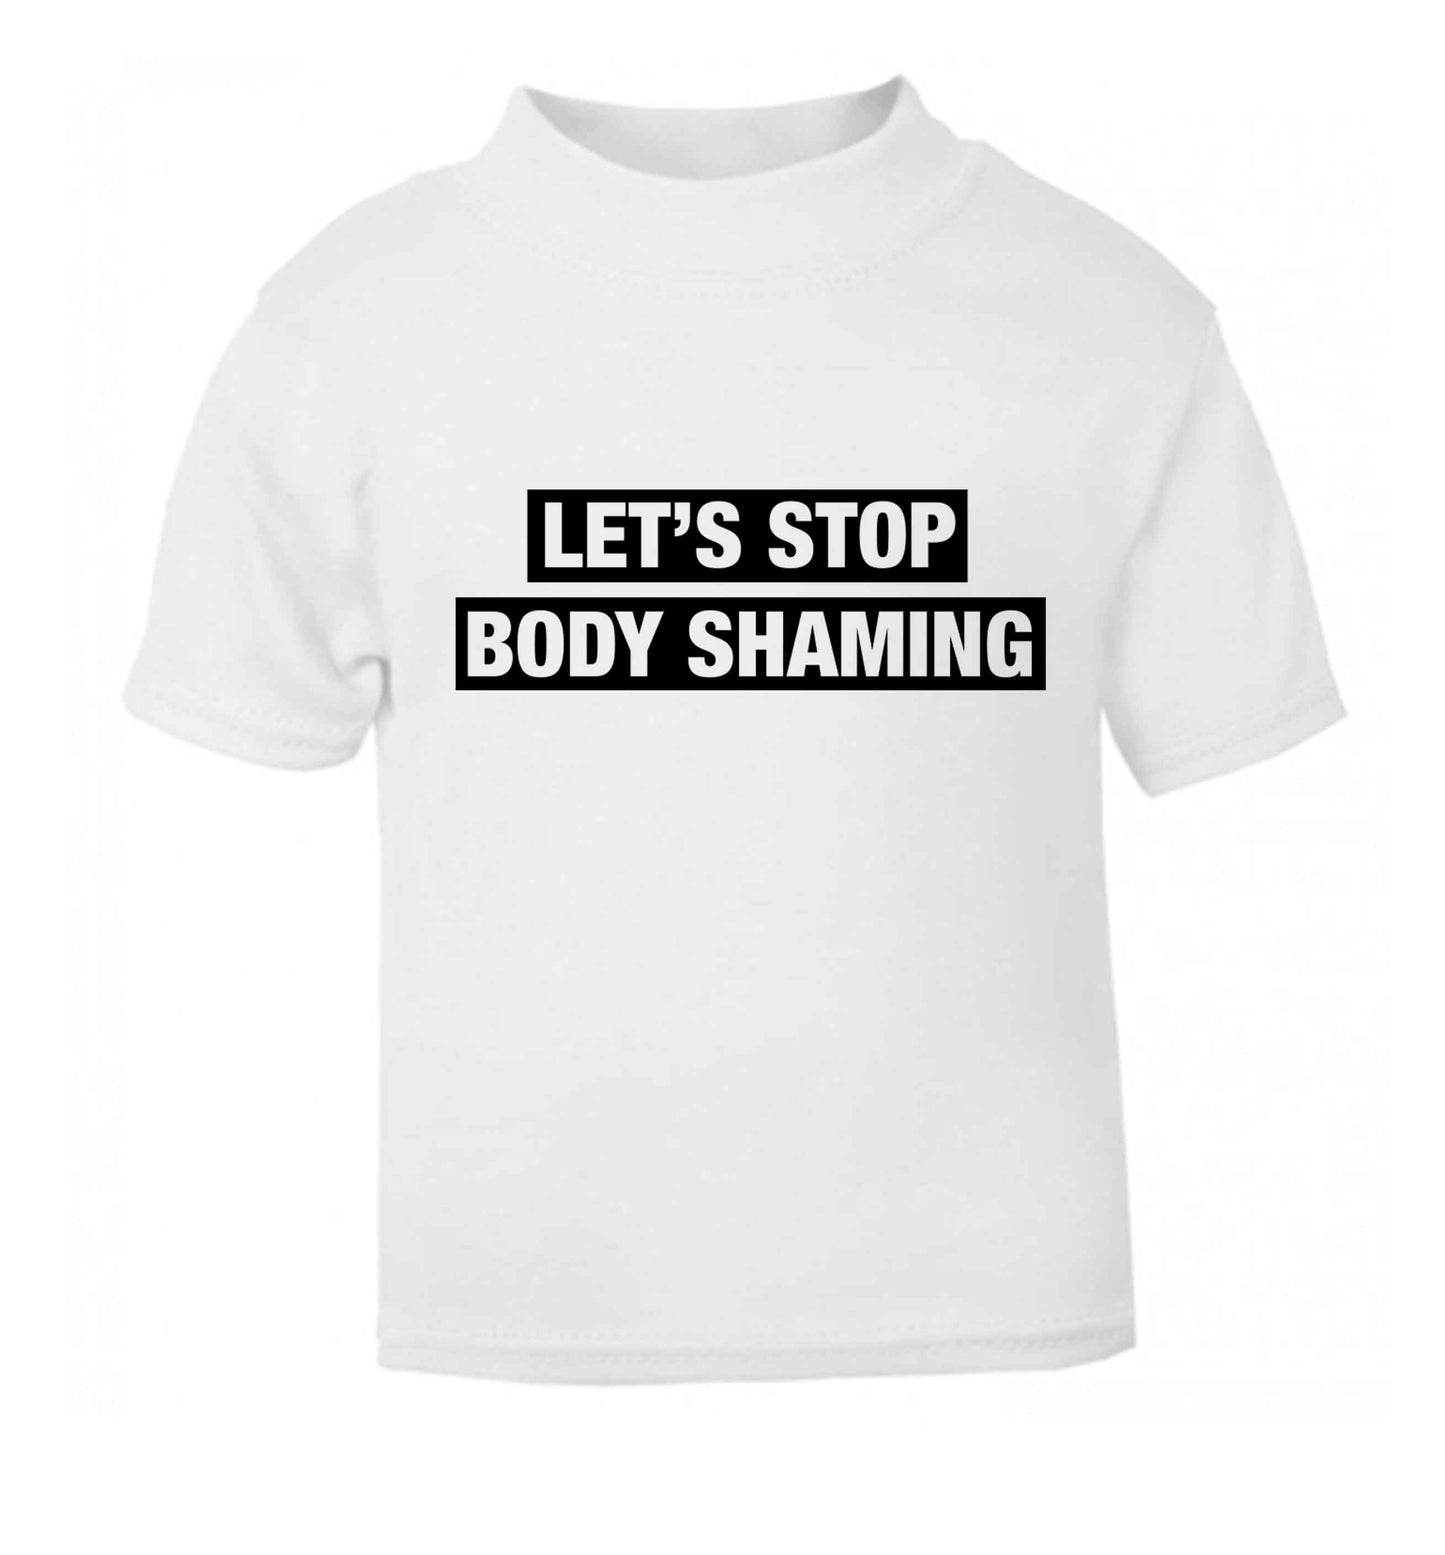 Let's stop body shaming white baby toddler Tshirt 2 Years